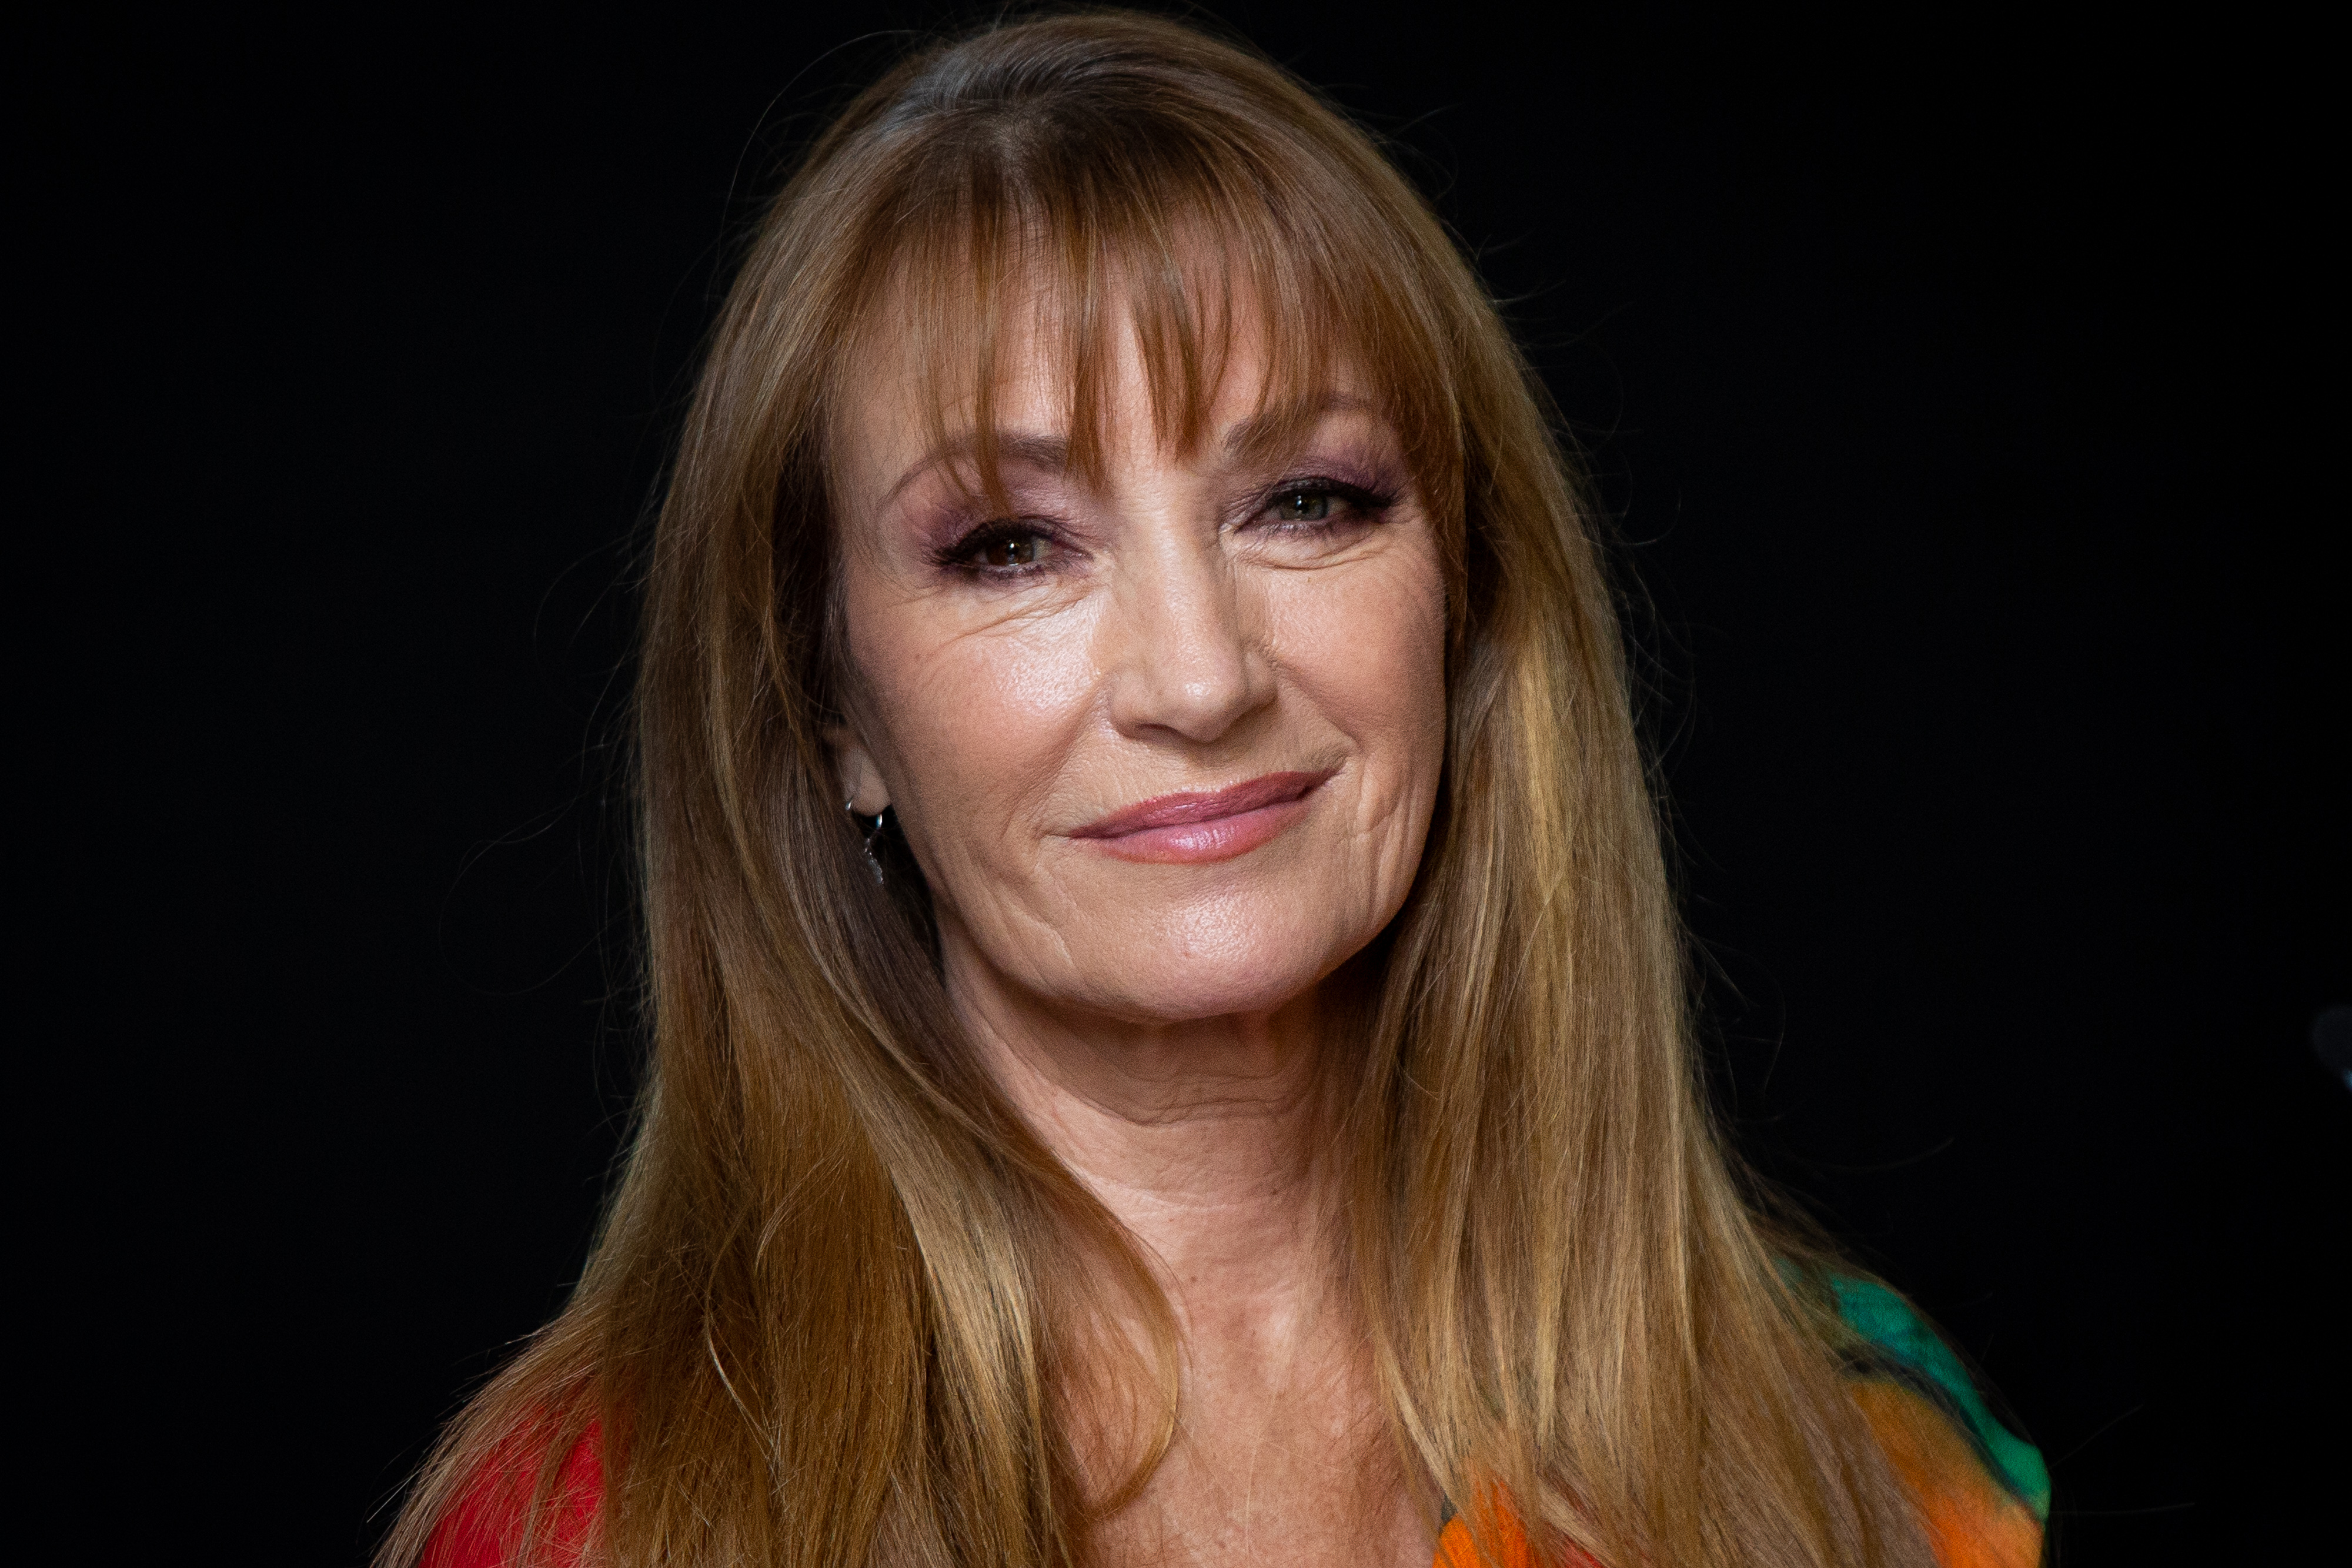 Jane Seymour on October 26, 2020 | Source: Getty Images